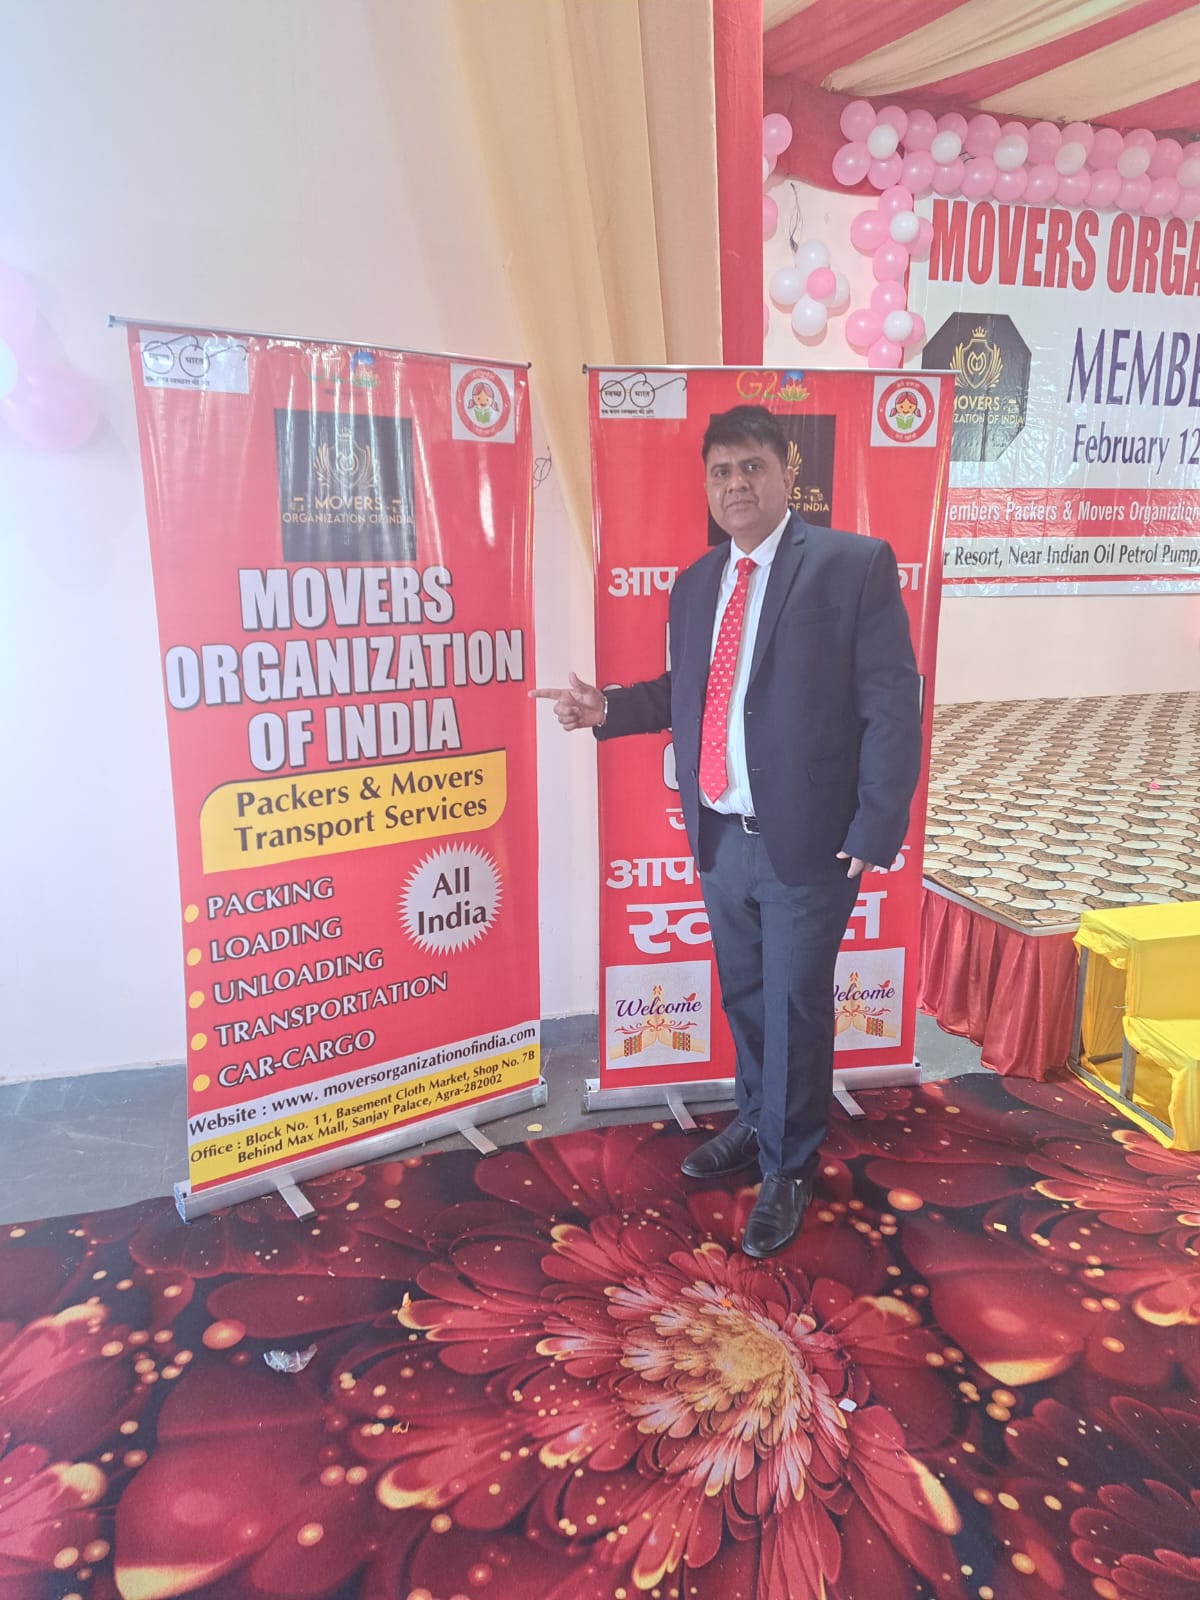 Member of Movers Organization of India - 1